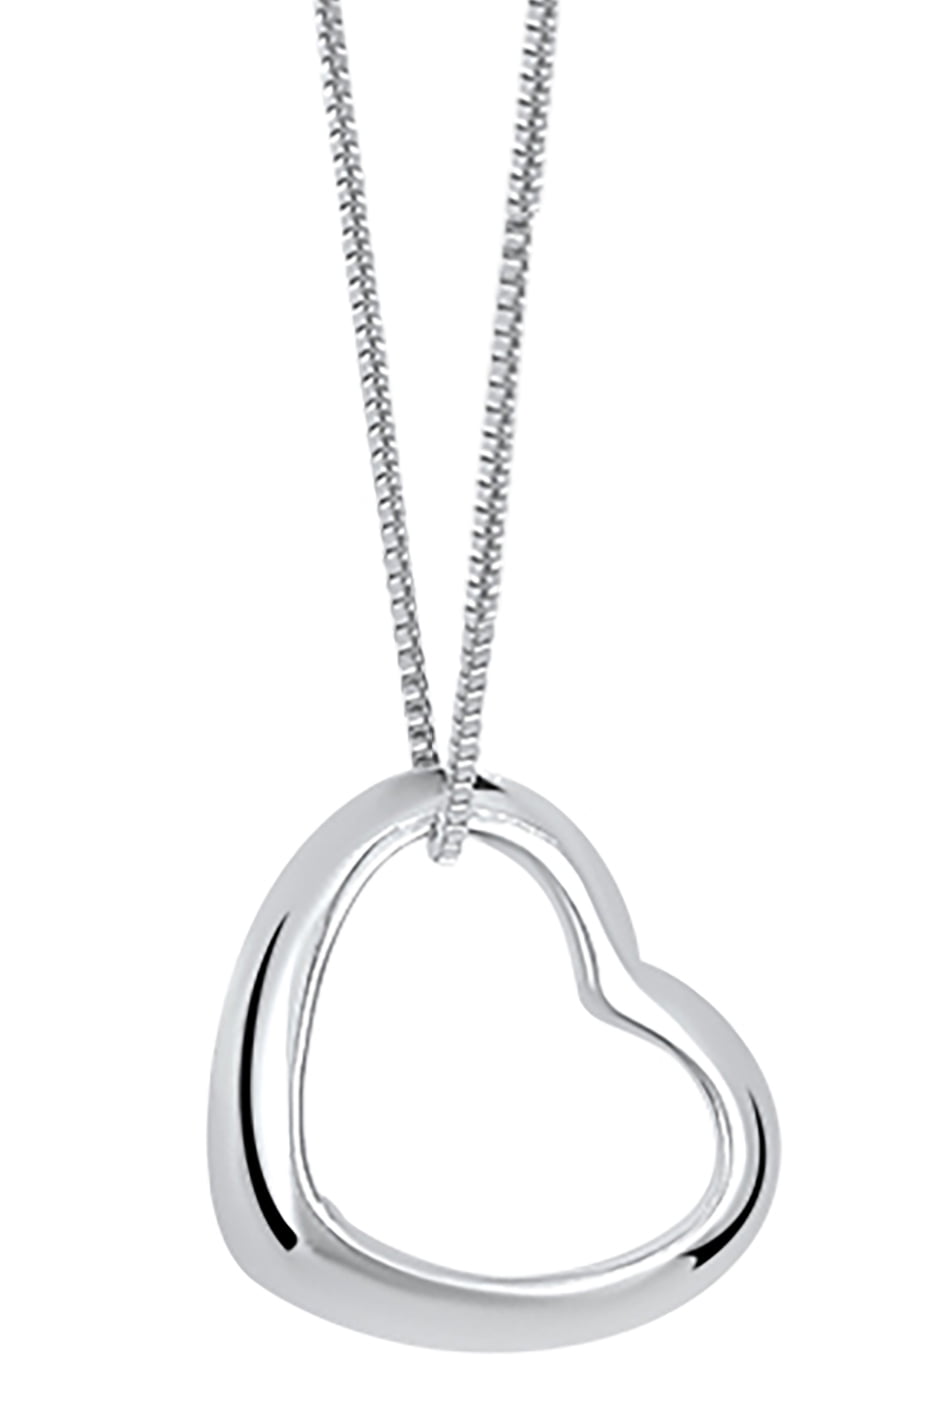 Children's Jewellery Gift Floating HEART Necklace Sterling Silver 16" chain 